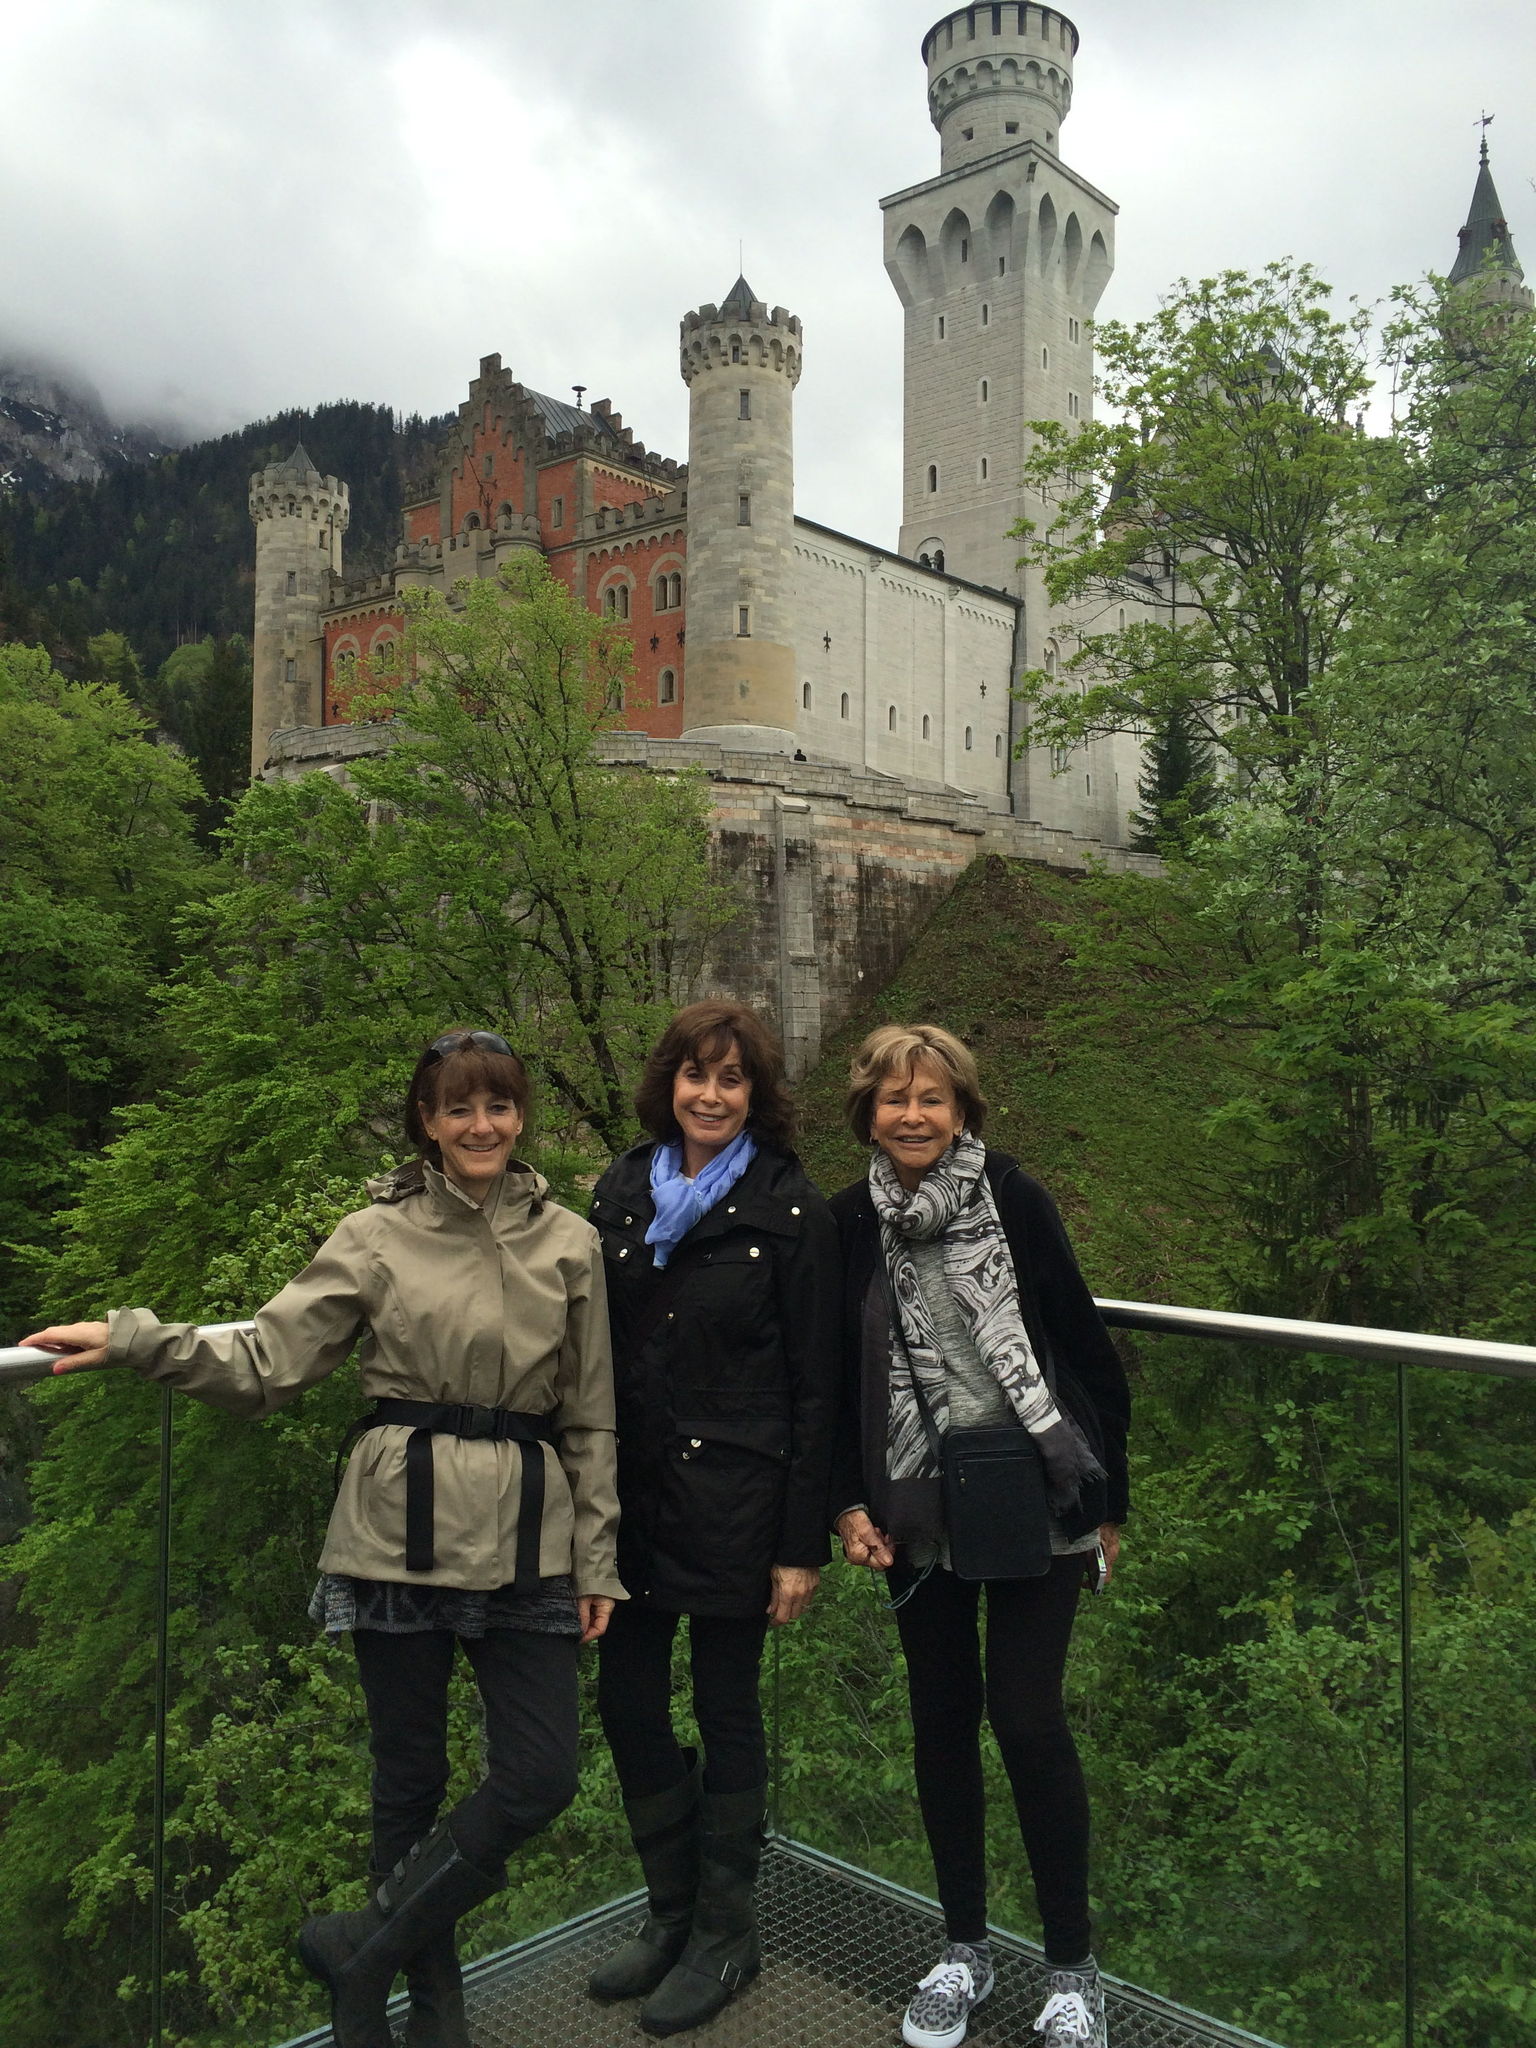 Our trip to the Castle in Fussen, Germany